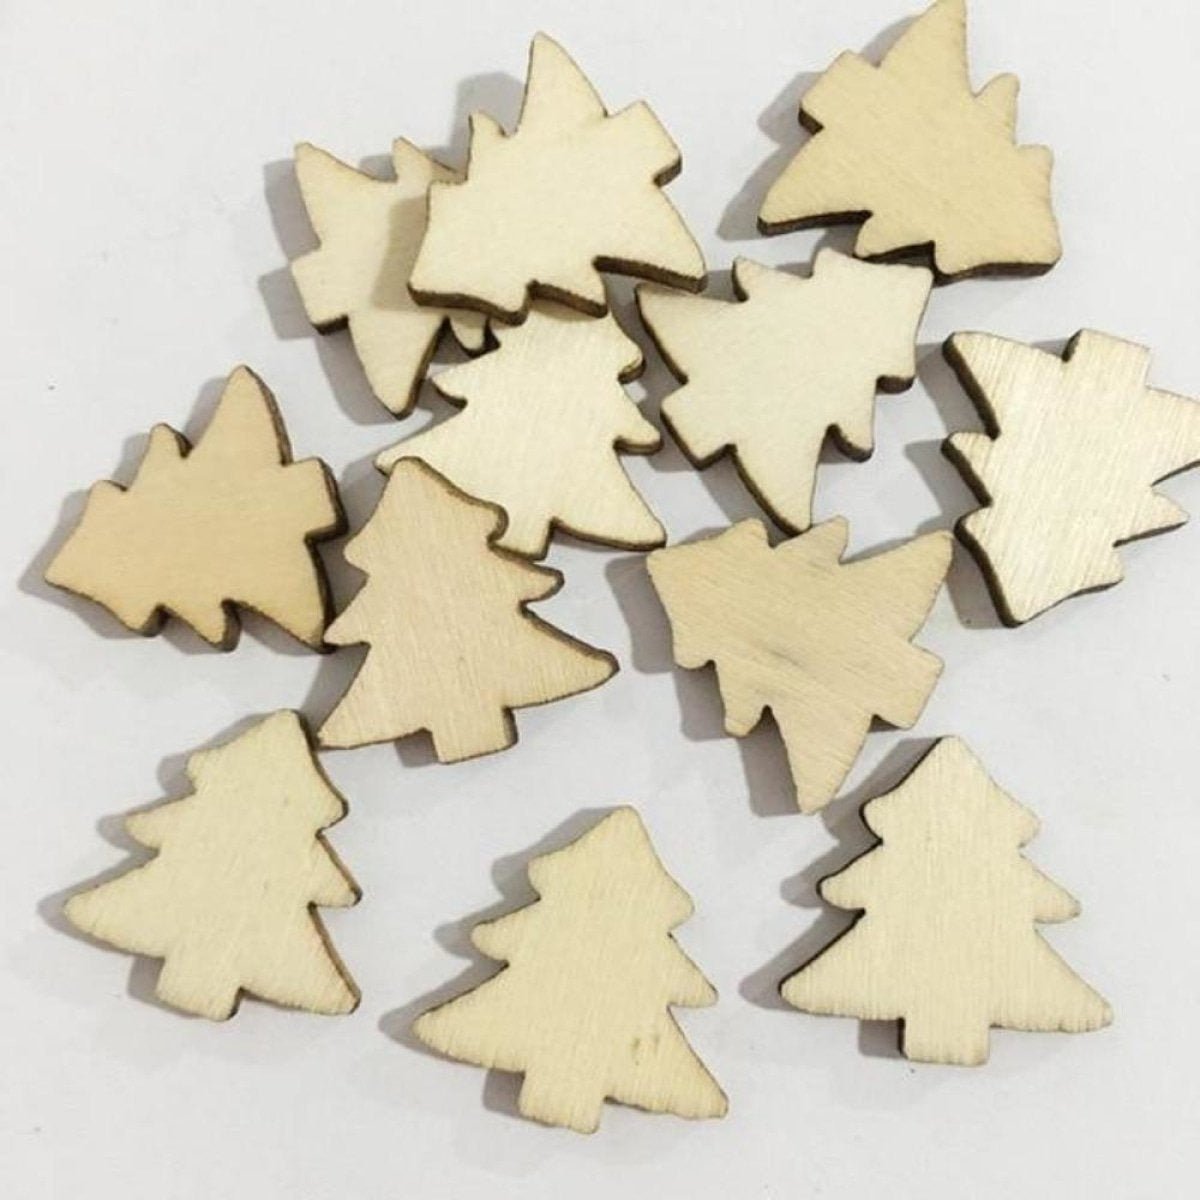 50pcs Christmas Trees 19mm Natural Wood Craft Christmas Pendant Hanging Ornament New Year Decor Home Decorations - Asia Sell